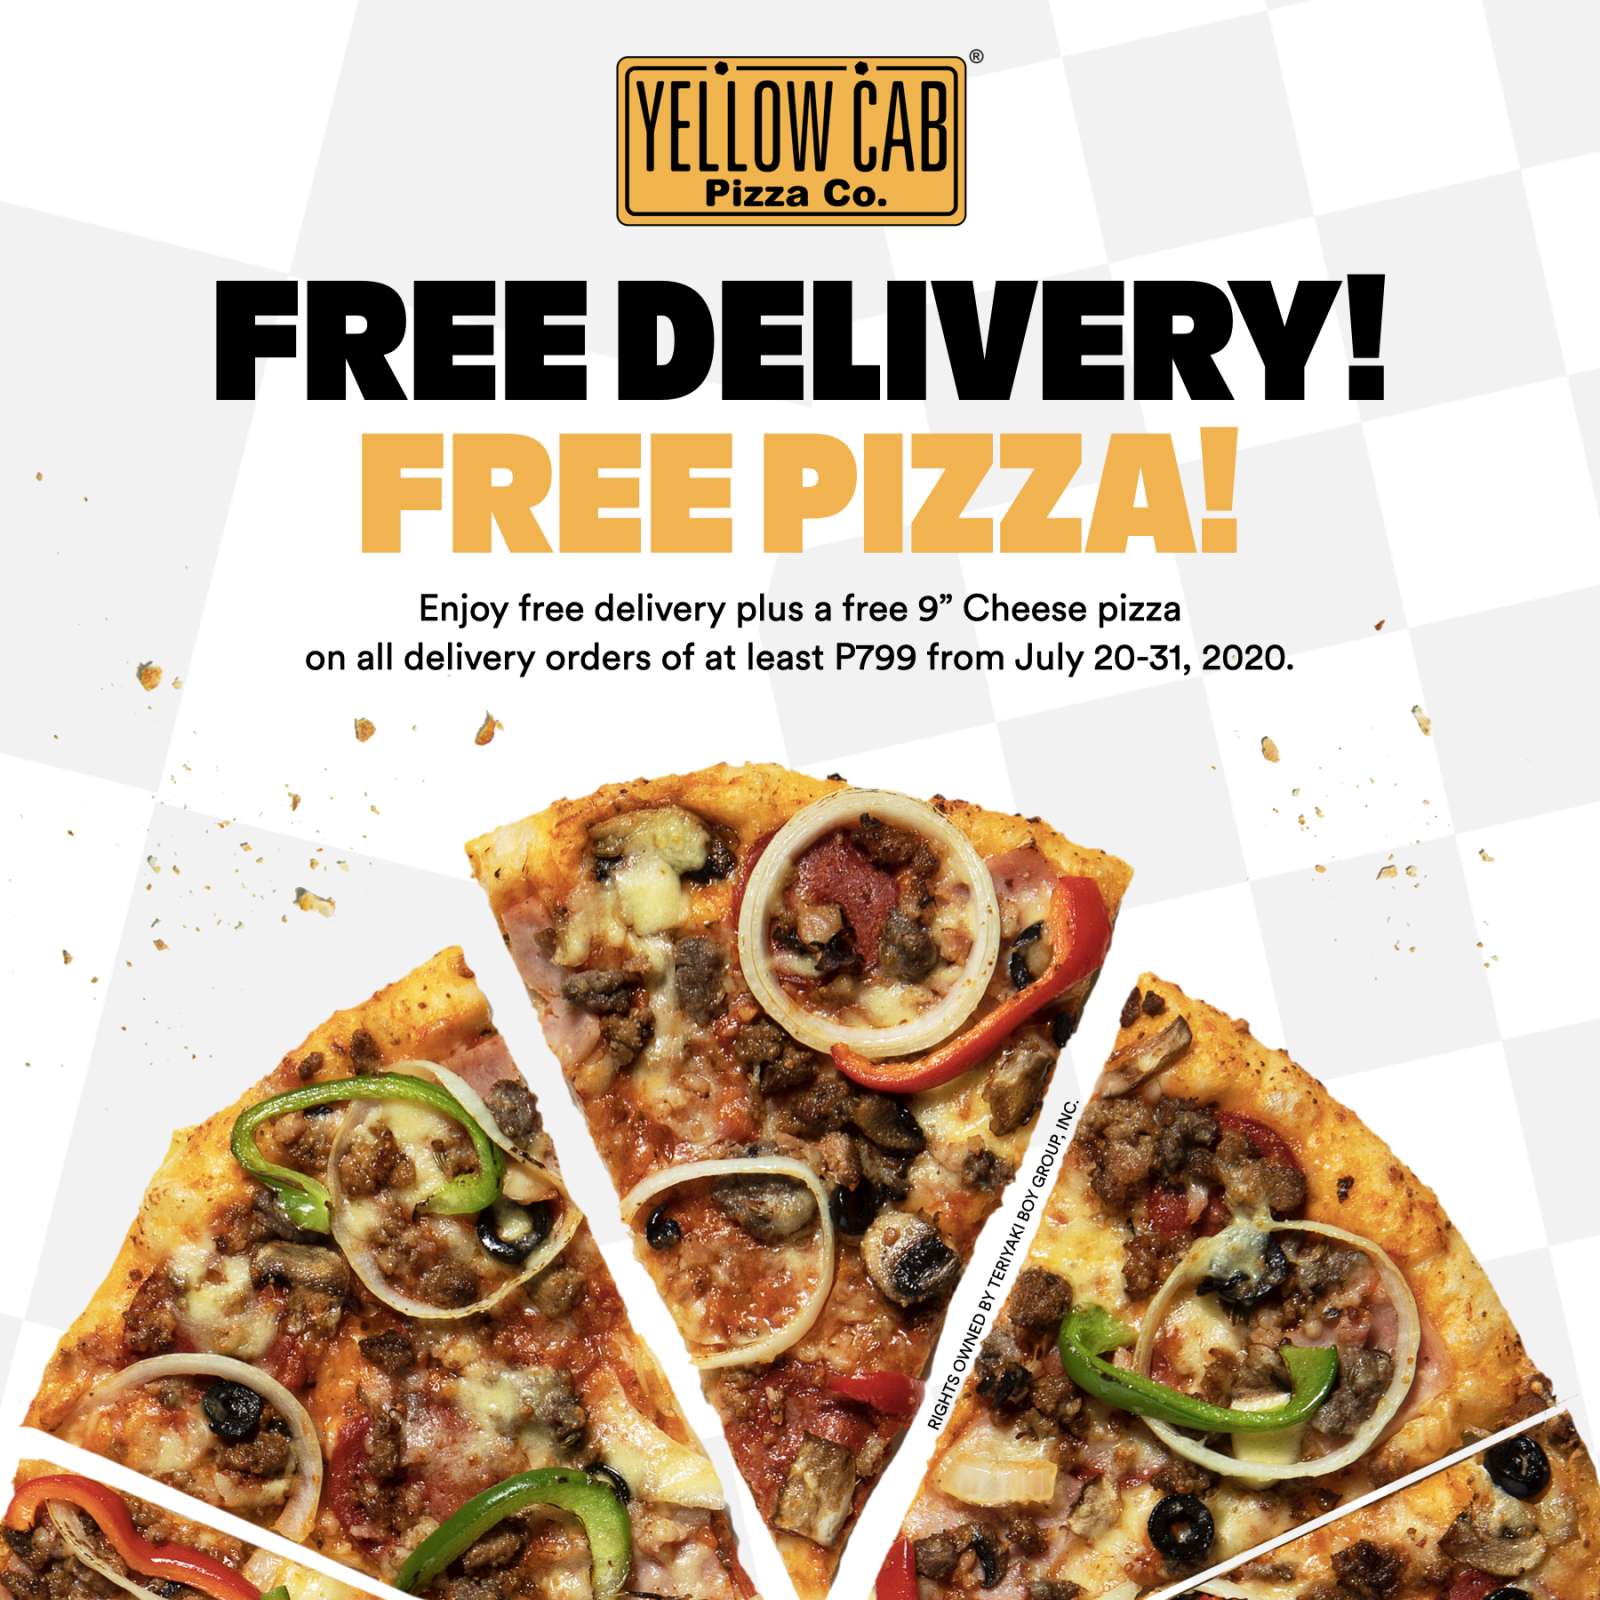 Enjoy free delivery and free pizza from Yellow Cab until end of July